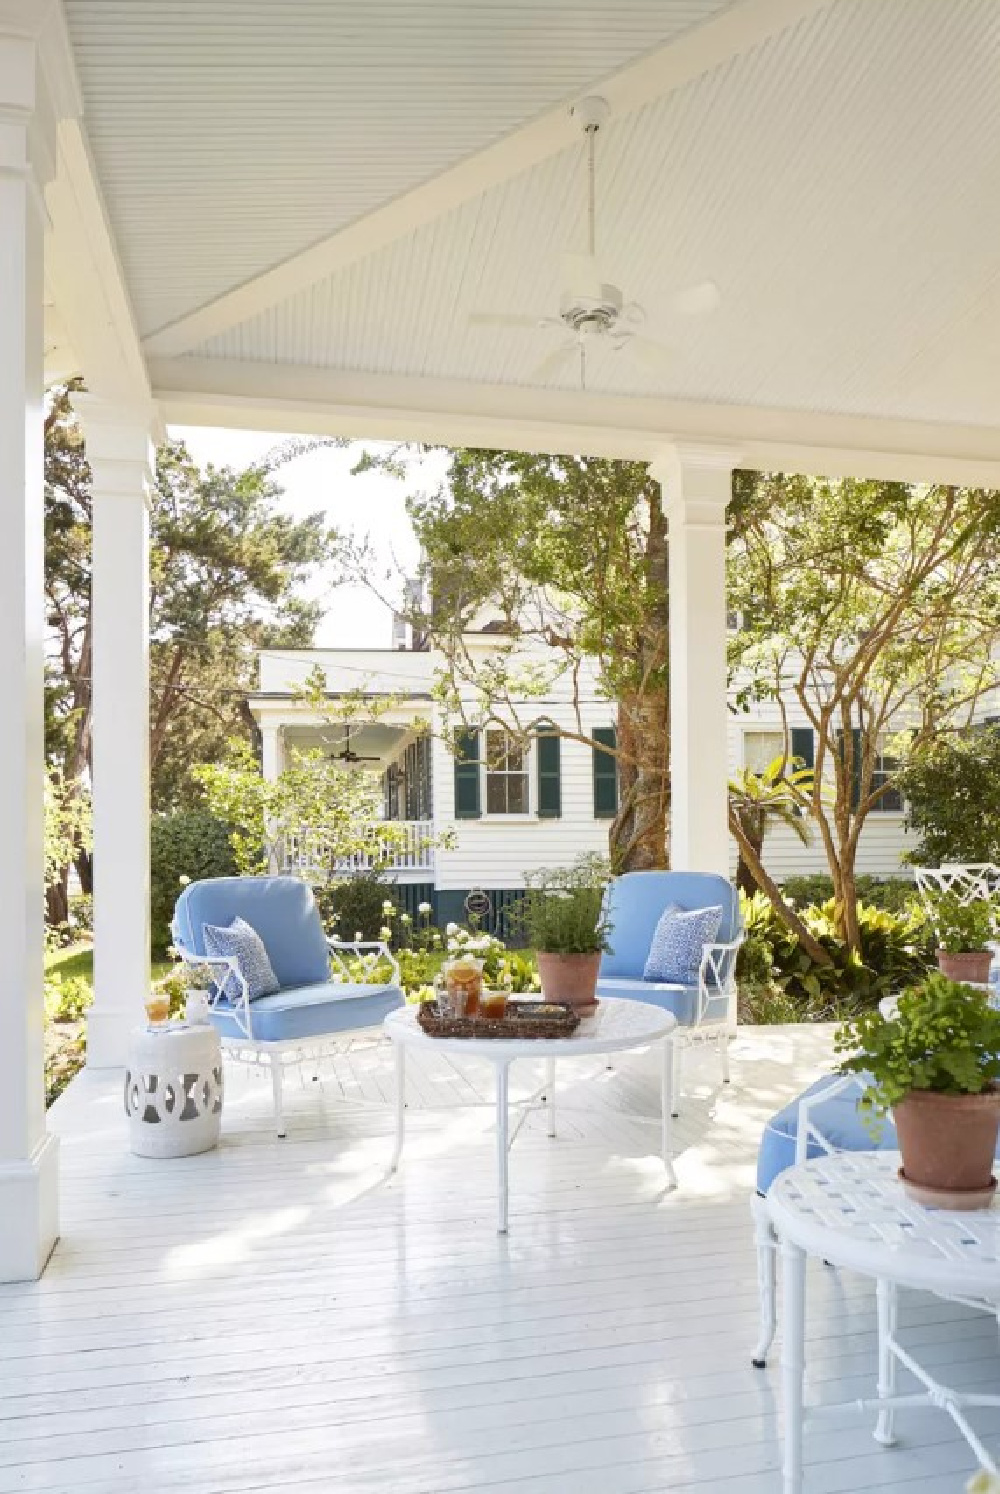 Haint blue ceiling on front porch with patio furniture and blue cushions - Julia Berolzheimer's home in Southern Living (photo: Hector Manuel Sanchez). #bmsimplywhite